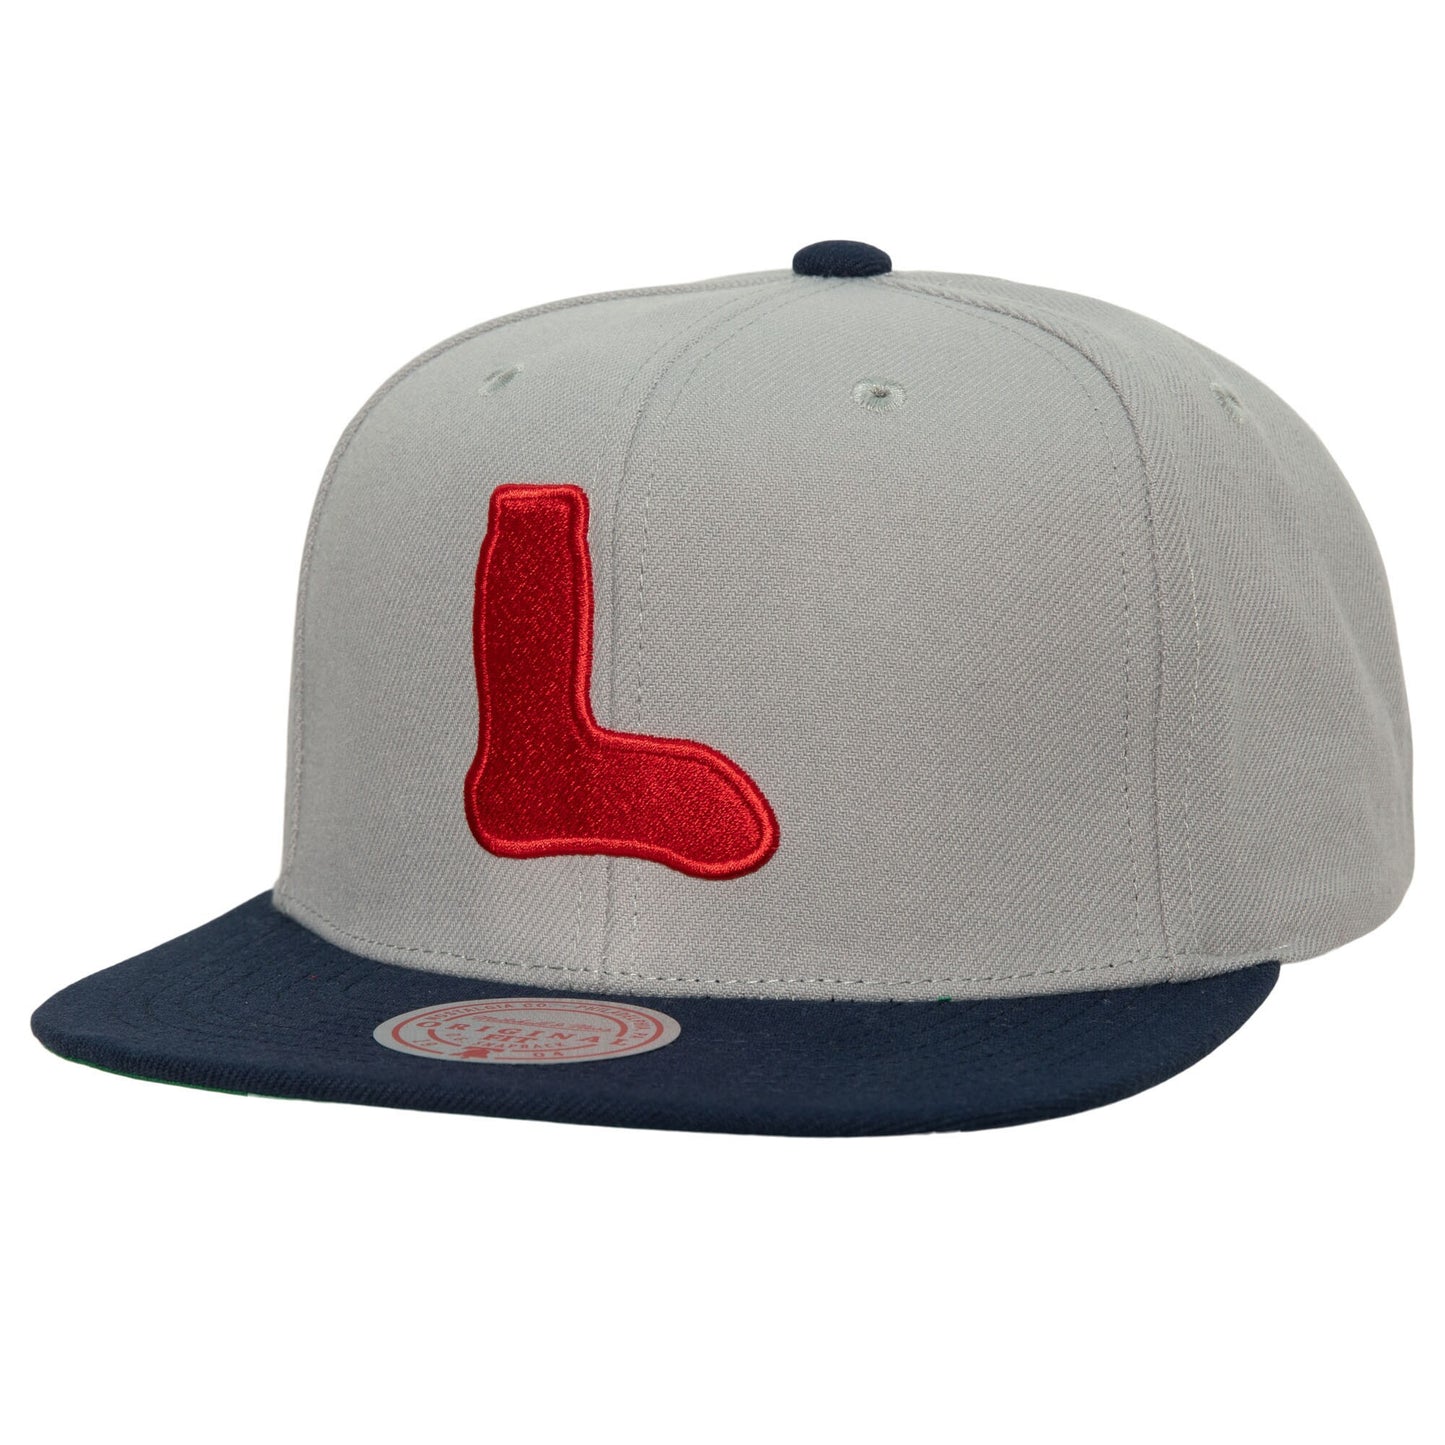 Boston Red Sox Mitchell & Ness Cooperstown Collection Away Snapback Hat - Gray